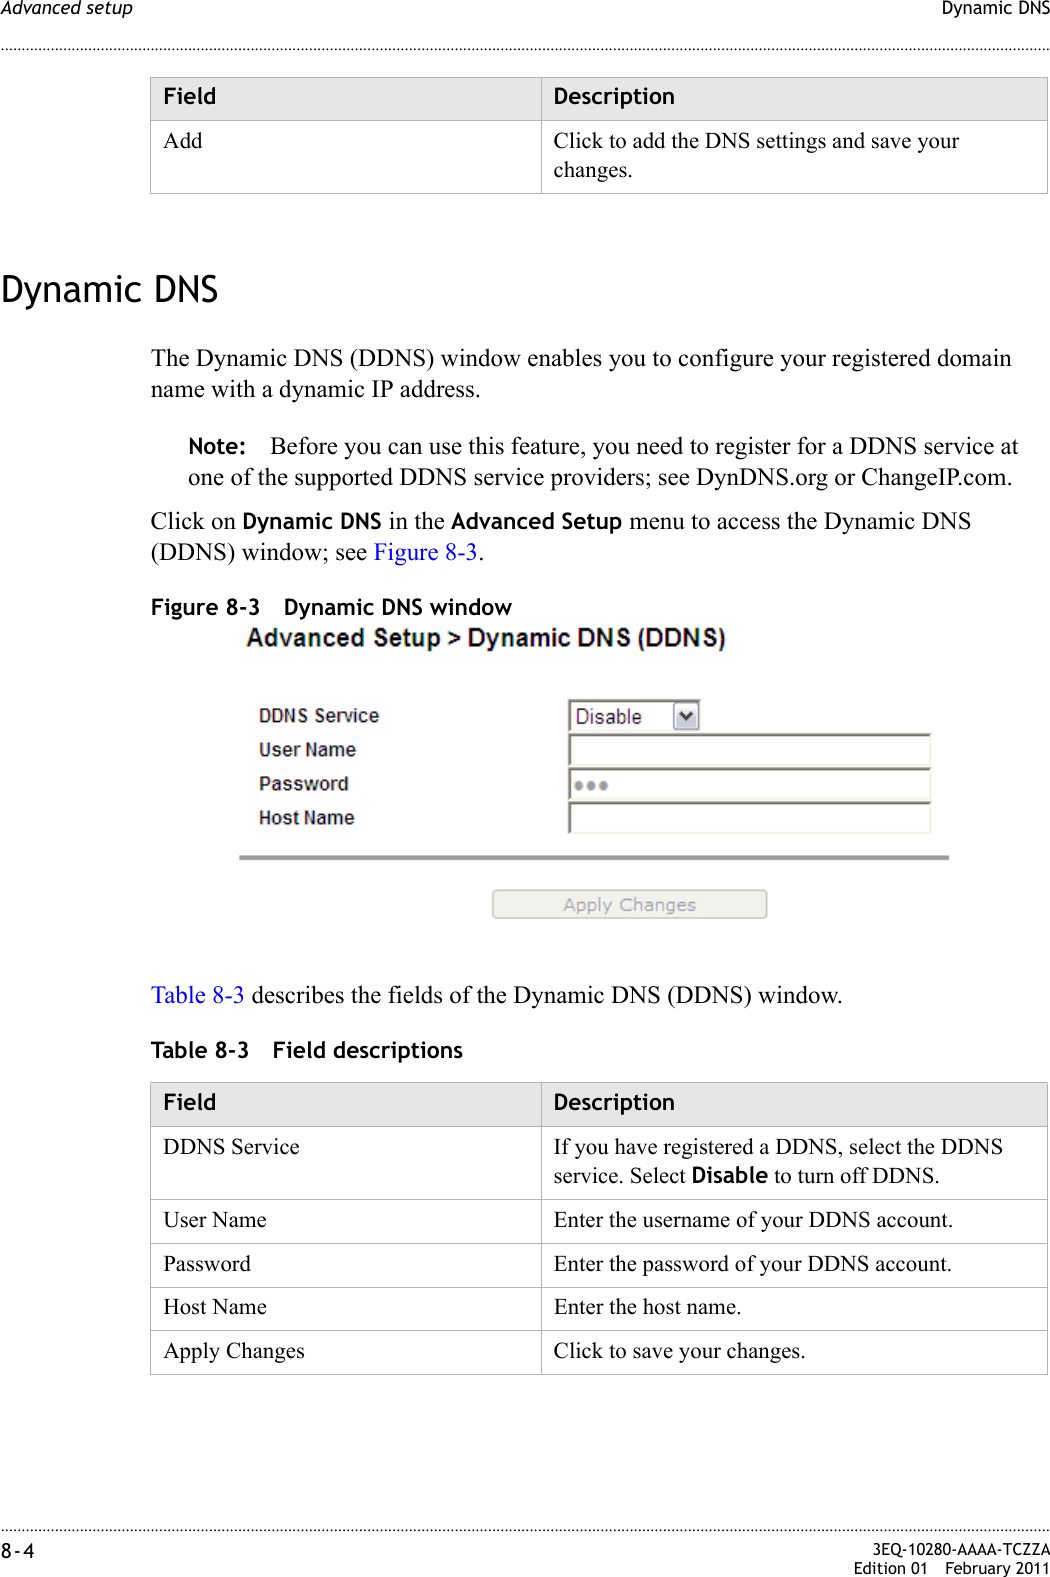 ............................................................................................................................................................................................................................................................Dynamic DNSAdvanced setup8-4  3EQ-10280-AAAA-TCZZAEdition 01 February 2011............................................................................................................................................................................................................................................................Dynamic DNSThe Dynamic DNS (DDNS) window enables you to configure your registered domain name with a dynamic IP address.Note: Before you can use this feature, you need to register for a DDNS service at one of the supported DDNS service providers; see DynDNS.org or ChangeIP.com.Click on Dynamic DNS in the Advanced Setup menu to access the Dynamic DNS (DDNS) window; see Figure 8-3.Figure 8-3 Dynamic DNS windowTable 8-3 describes the fields of the Dynamic DNS (DDNS) window.Table 8-3 Field descriptionsAdd Click to add the DNS settings and save your changes.Field DescriptionField DescriptionDDNS Service If you have registered a DDNS, select the DDNS service. Select Disable to turn off DDNS.User Name Enter the username of your DDNS account.Password Enter the password of your DDNS account.Host Name Enter the host name.Apply Changes Click to save your changes.